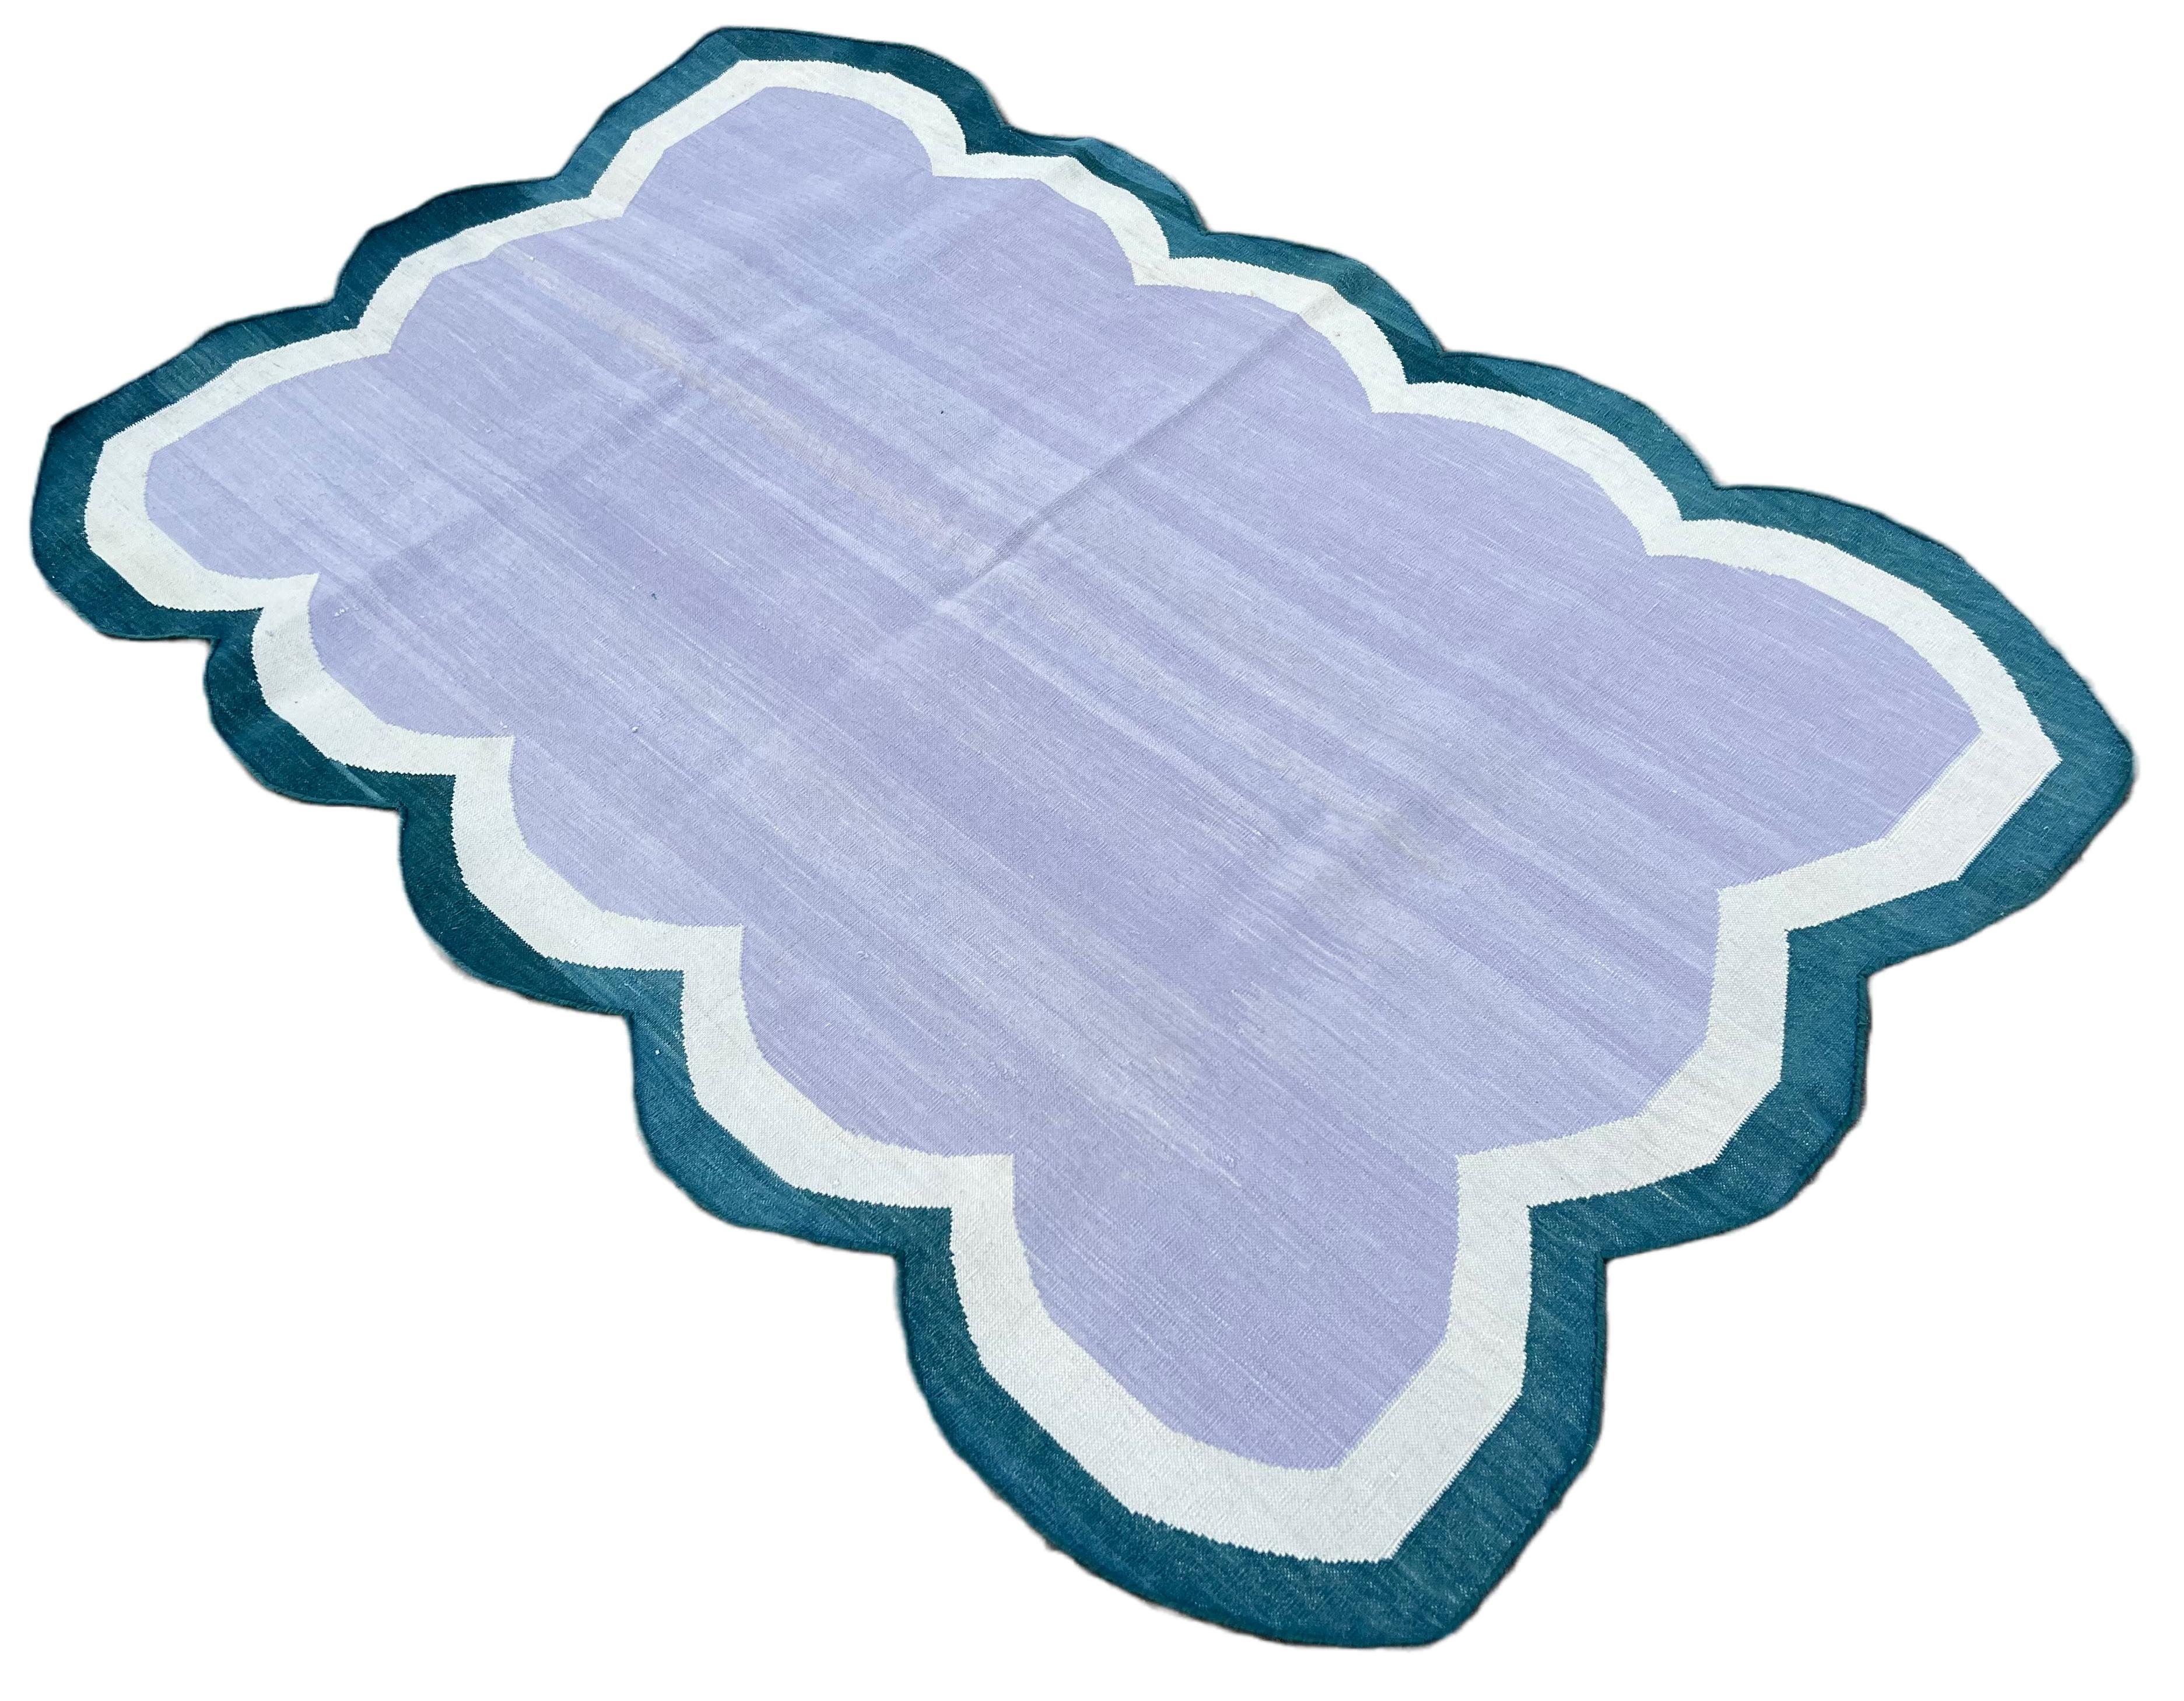 Cotton Vegetable Dyed Lavender, Cream And Teal Blue Four Sided Scalloped Rug-3'x5' 
(Scallops runs on all Four Sides)
These special flat-weave dhurries are hand-woven with 15 ply 100% cotton yarn. Due to the special manufacturing techniques used to